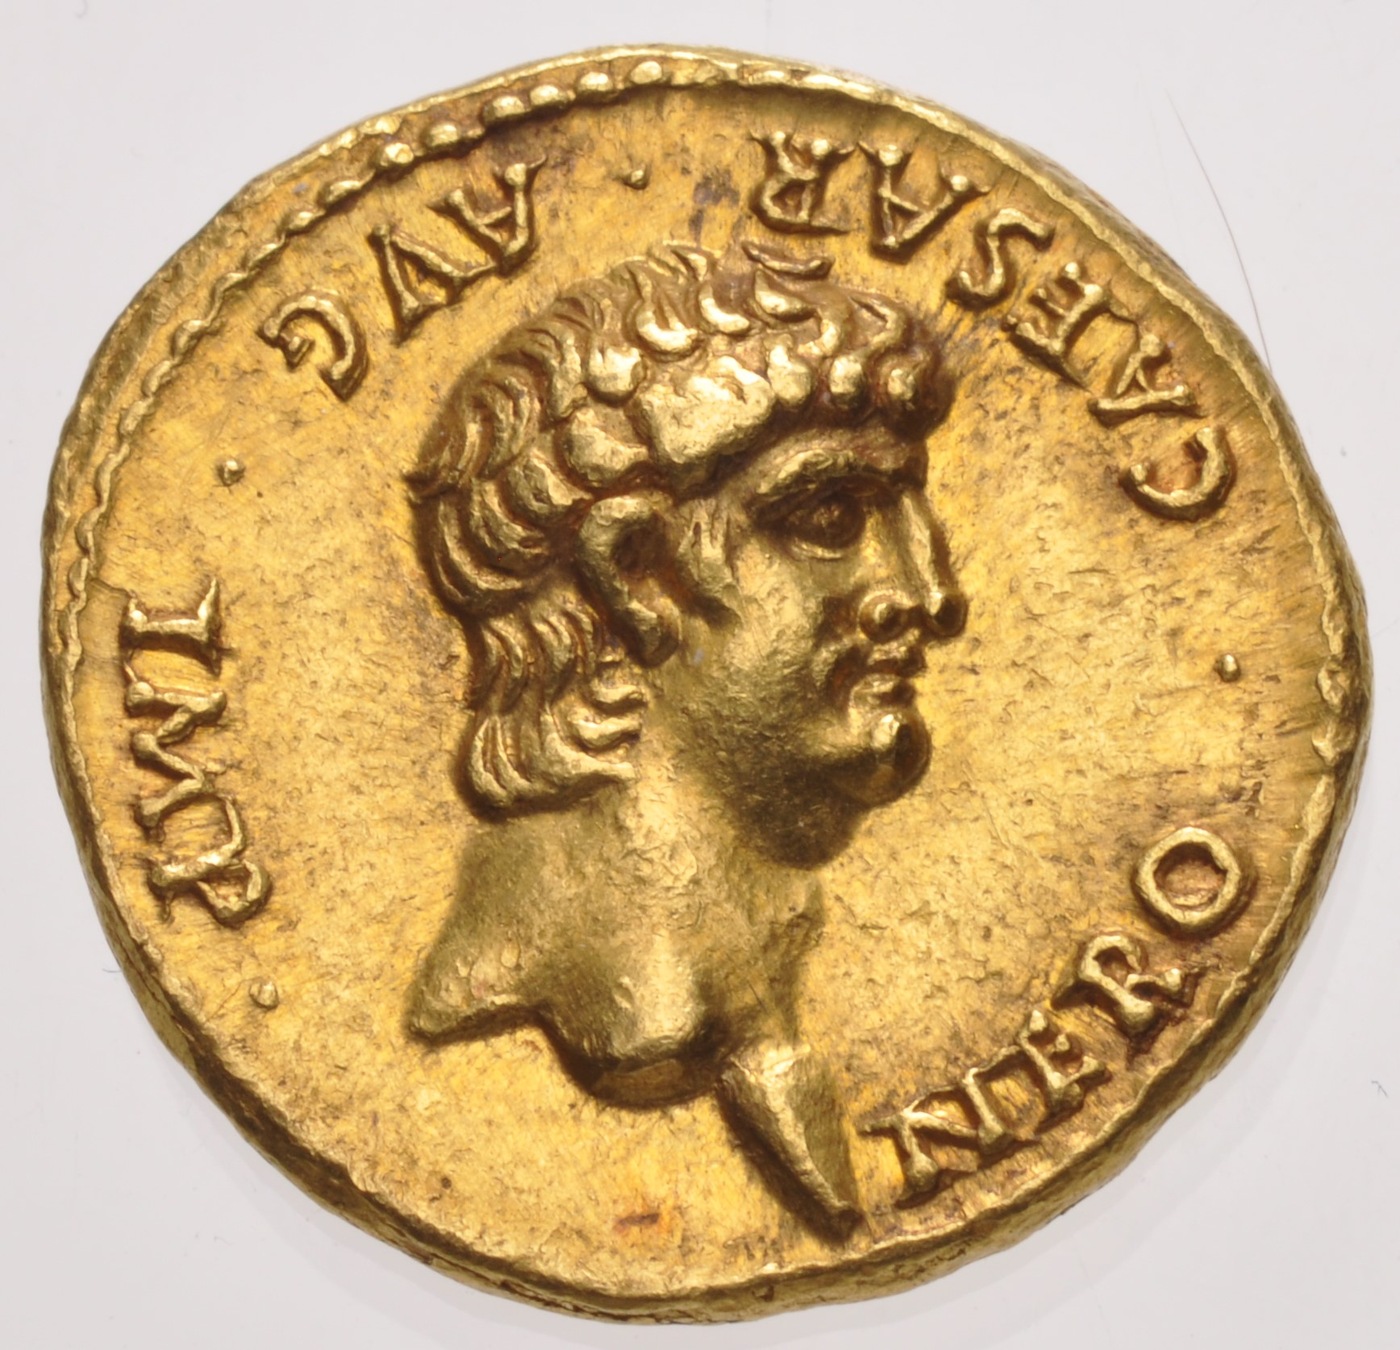 Photo depicting a gold coin that shows the head of Nero, the fifth emperor of Rome.